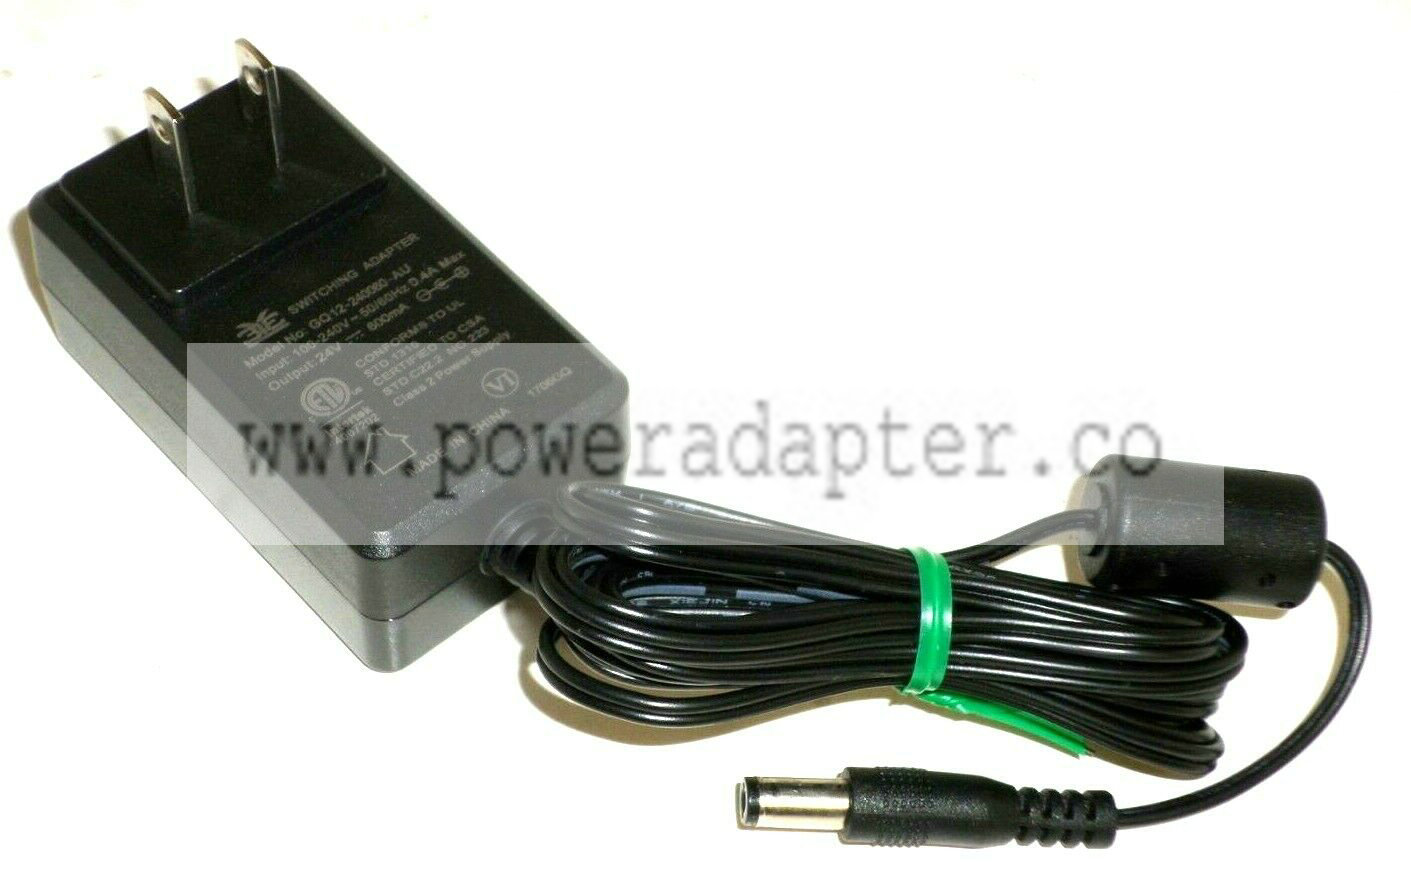 3YE Switching Power Supply Adapter 24V 600mA Model GQ12-240060-AU Item Condition: Item is lightly used and 100% wo